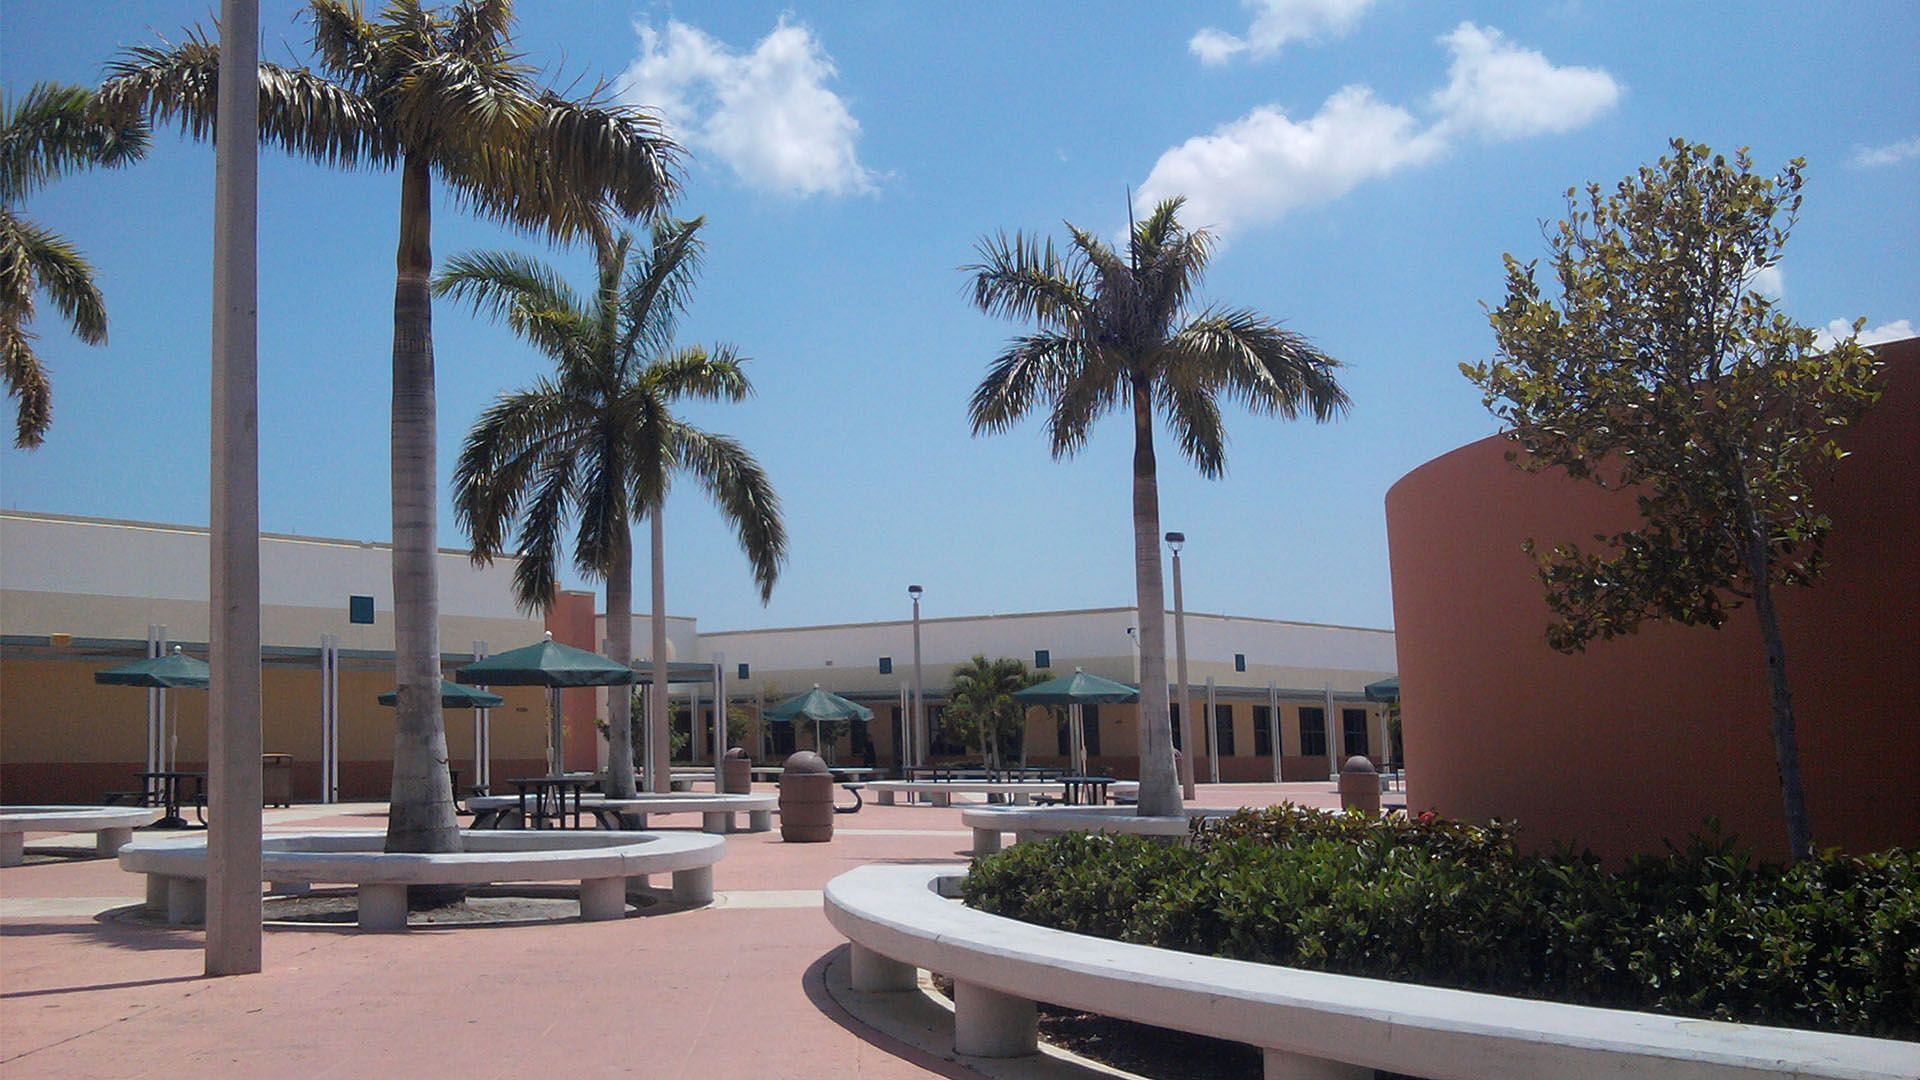 Jupiter High School in Florida was put under a temporary lockdown (image via Wikimedia Commons)